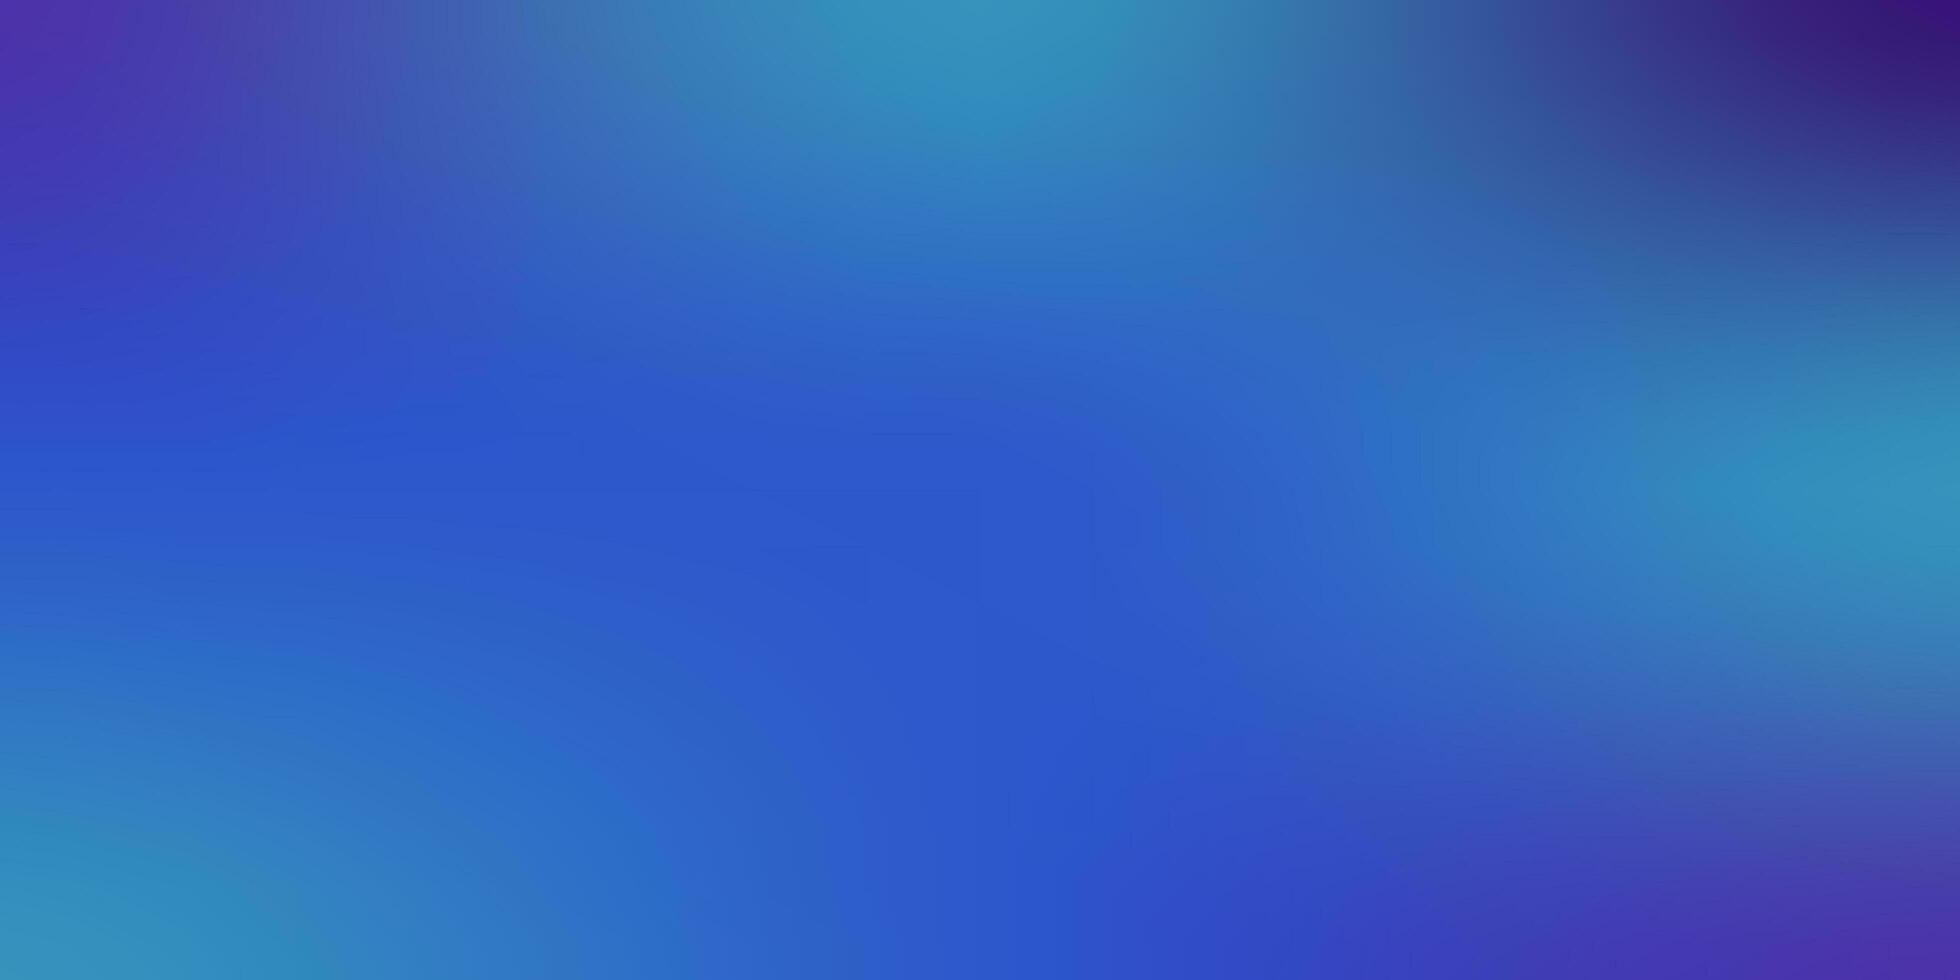 gradient blue color background, vector for banners, flyers, greeting cards, wallpapers, posters, flyers, business cards. photo